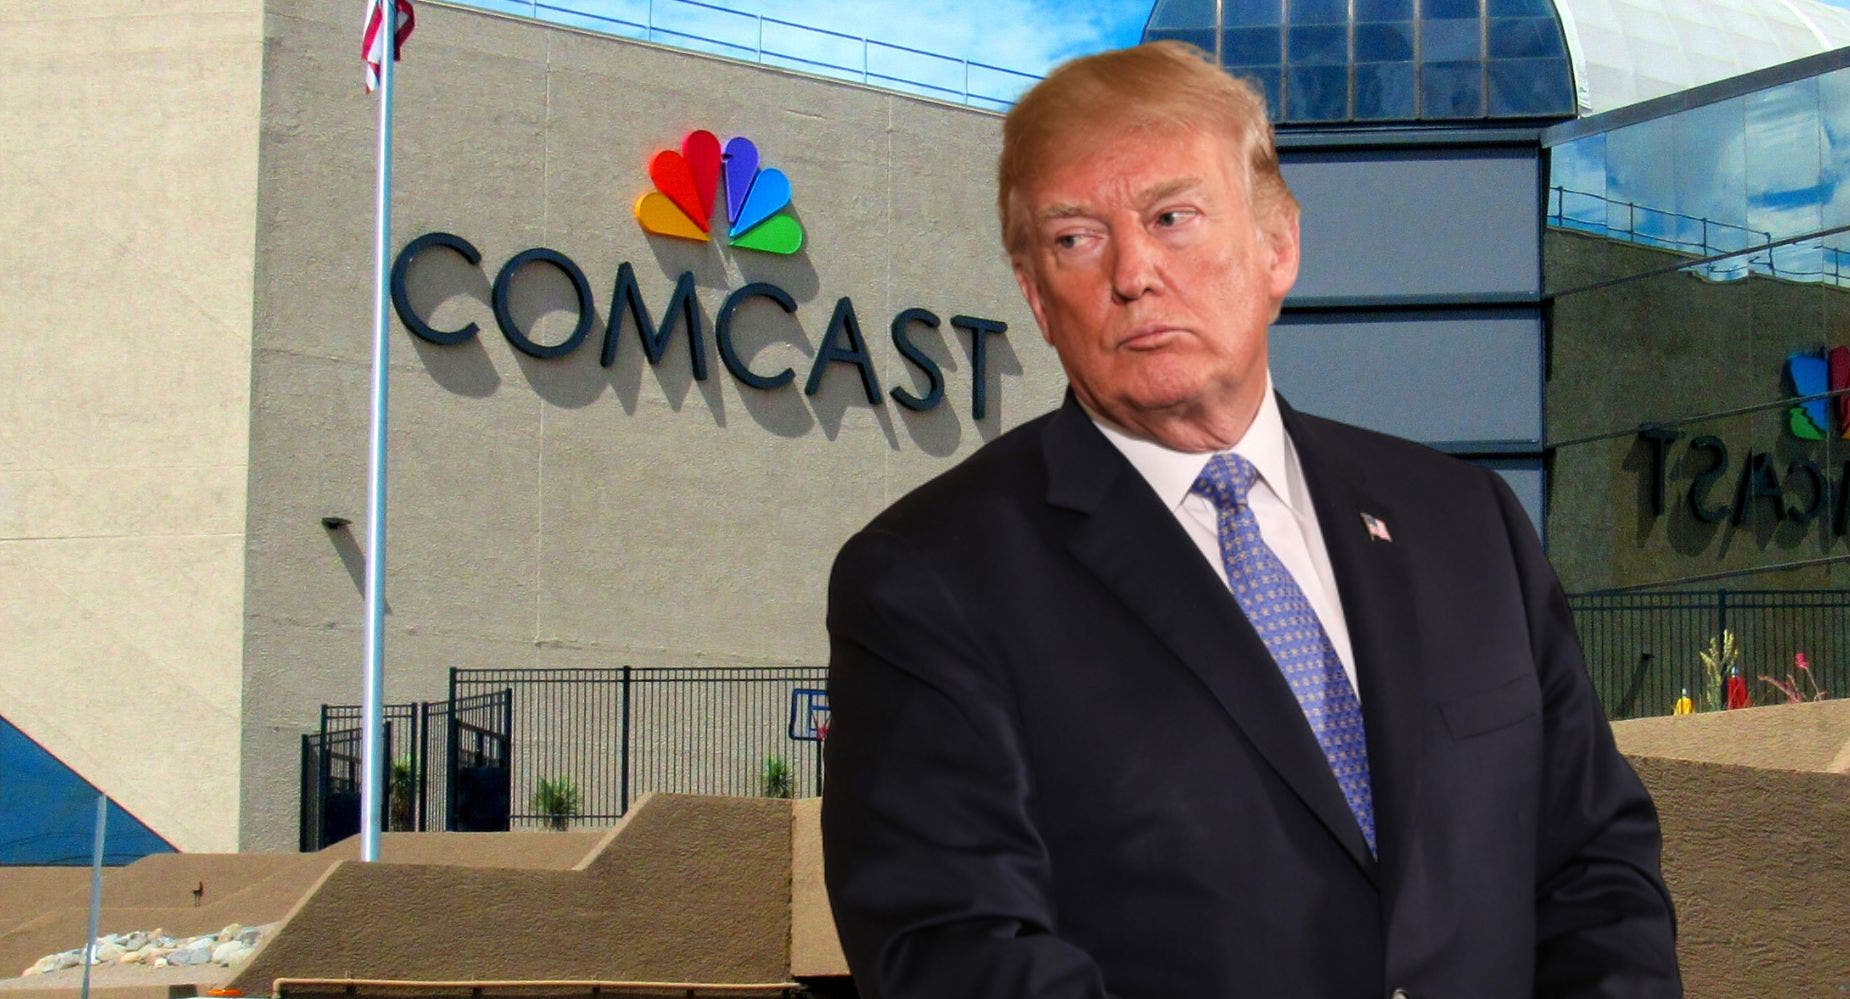 Trump Wants Comcast Investigated For 'Treason,' White House Responds: 'Outrageous Attack On Our Democracy'